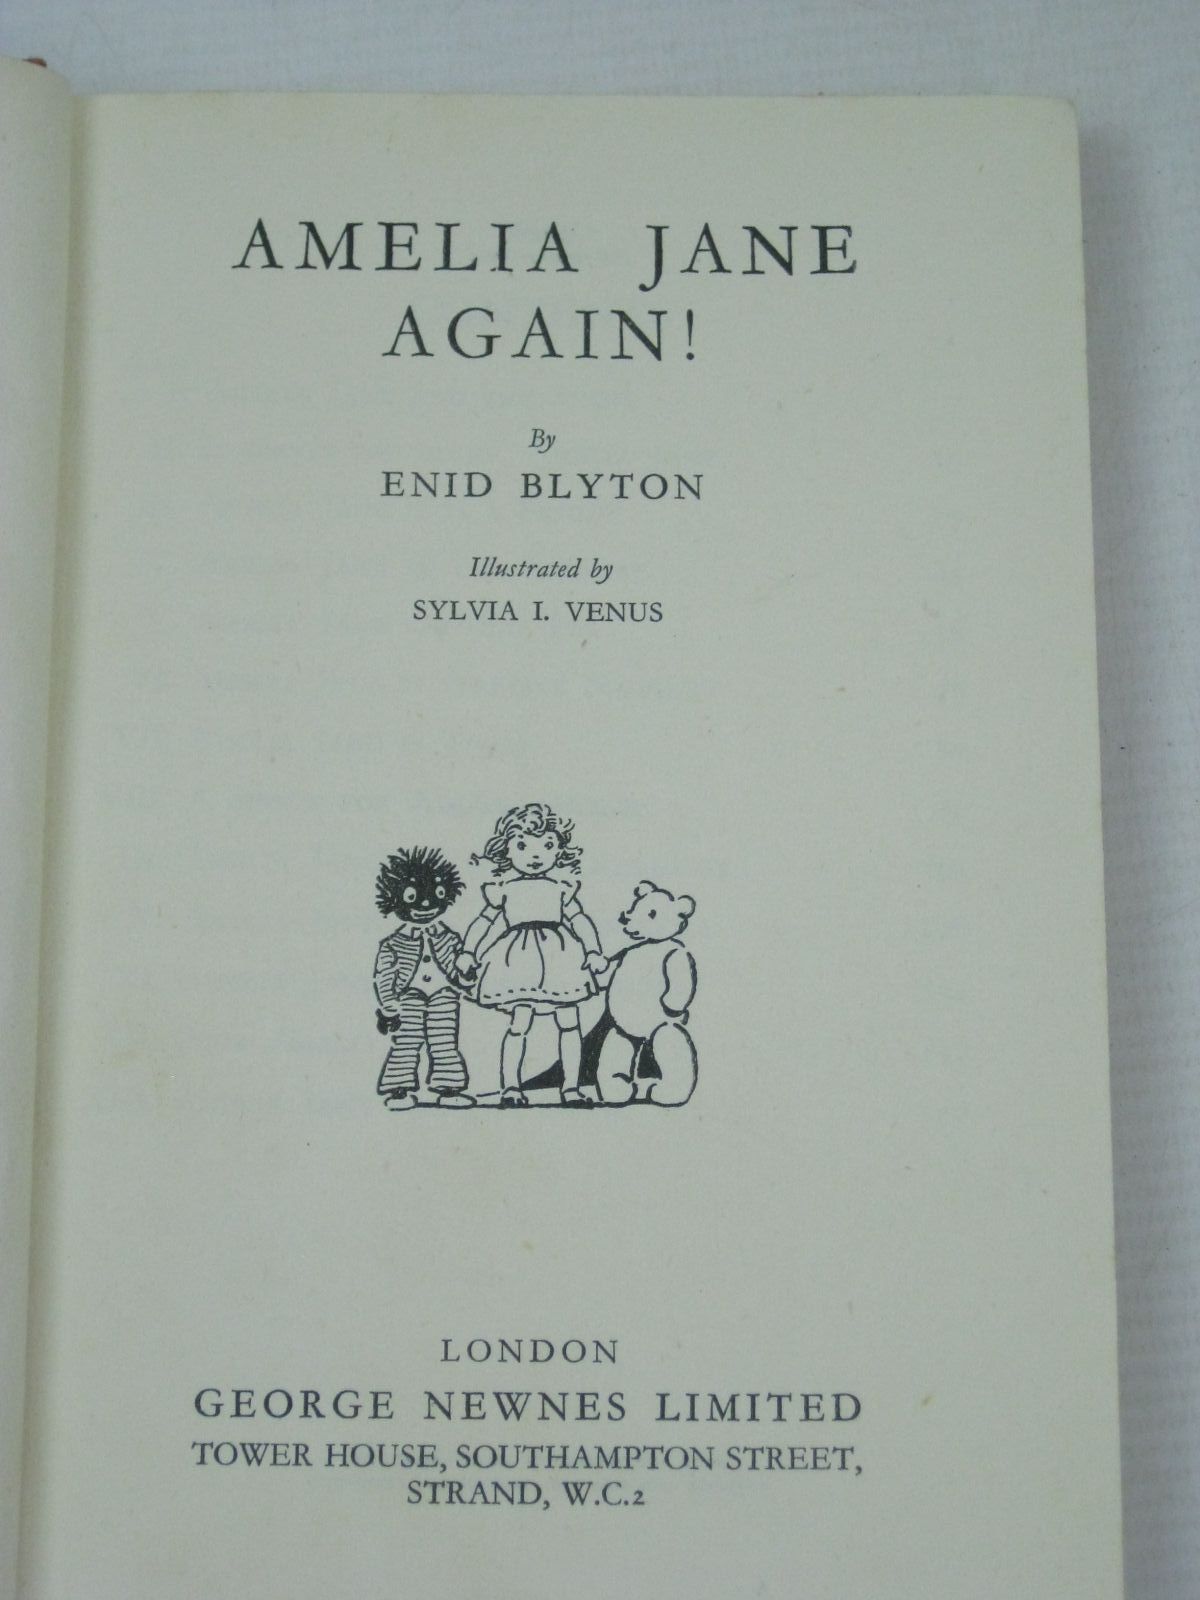 Photo of AMELIA JANE AGAIN written by Blyton, Enid illustrated by Venus, Sylvia published by George Newnes Ltd. (STOCK CODE: 1405858)  for sale by Stella & Rose's Books